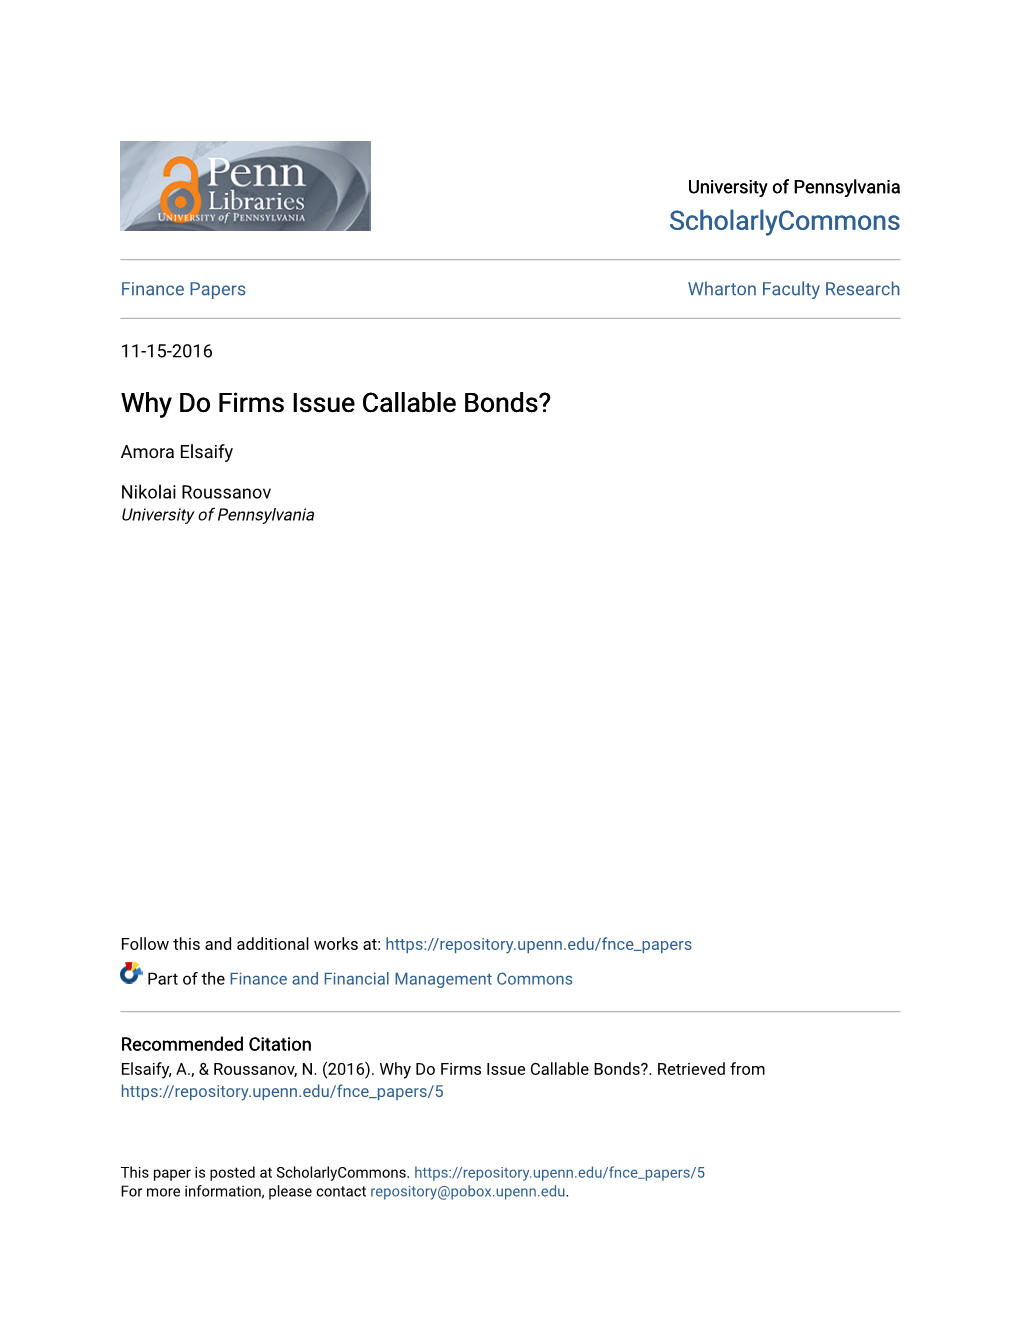 Why Do Firms Issue Callable Bonds?